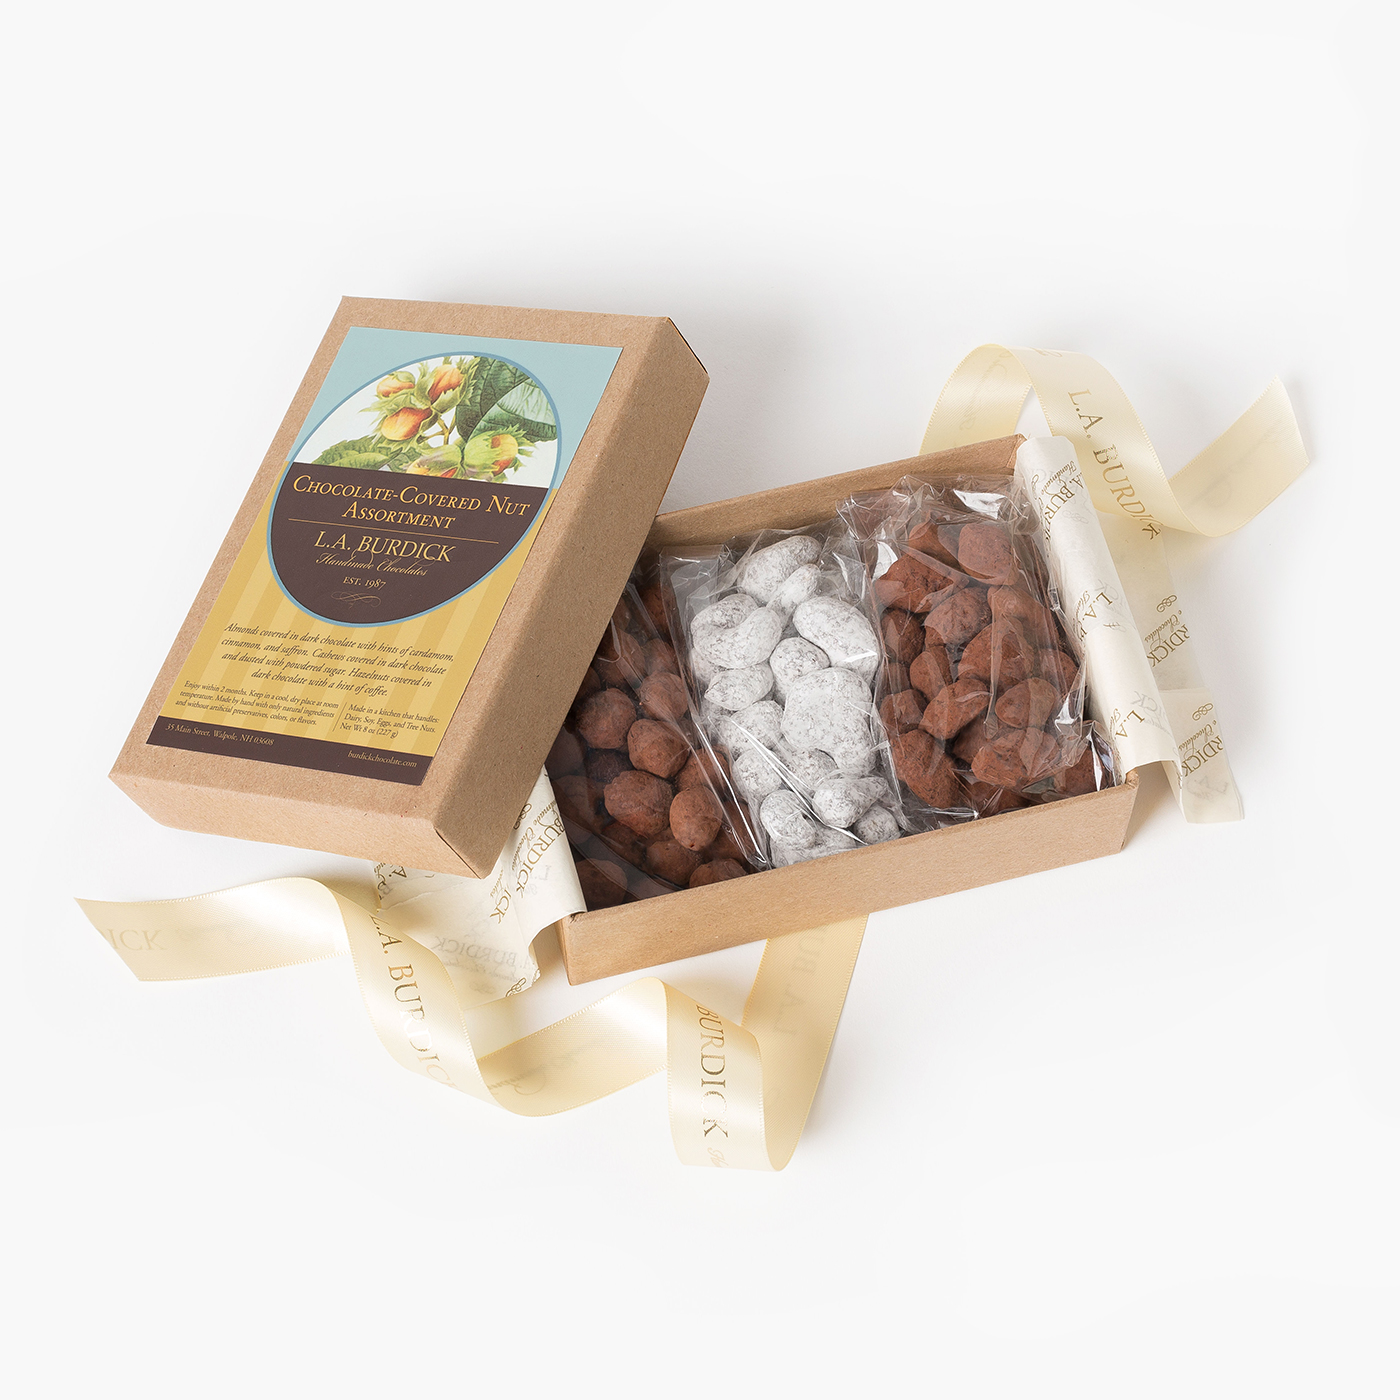 Buy Customized Chocolate Wrapper with Greeting Message Chocolate, Sweet,  and Nuts Combo Gift Set - For Employees, Dealers, Customers, Stakeholders,  Personal or Corporate Diwali Gifting CV4 online - The Gifting Marketplace